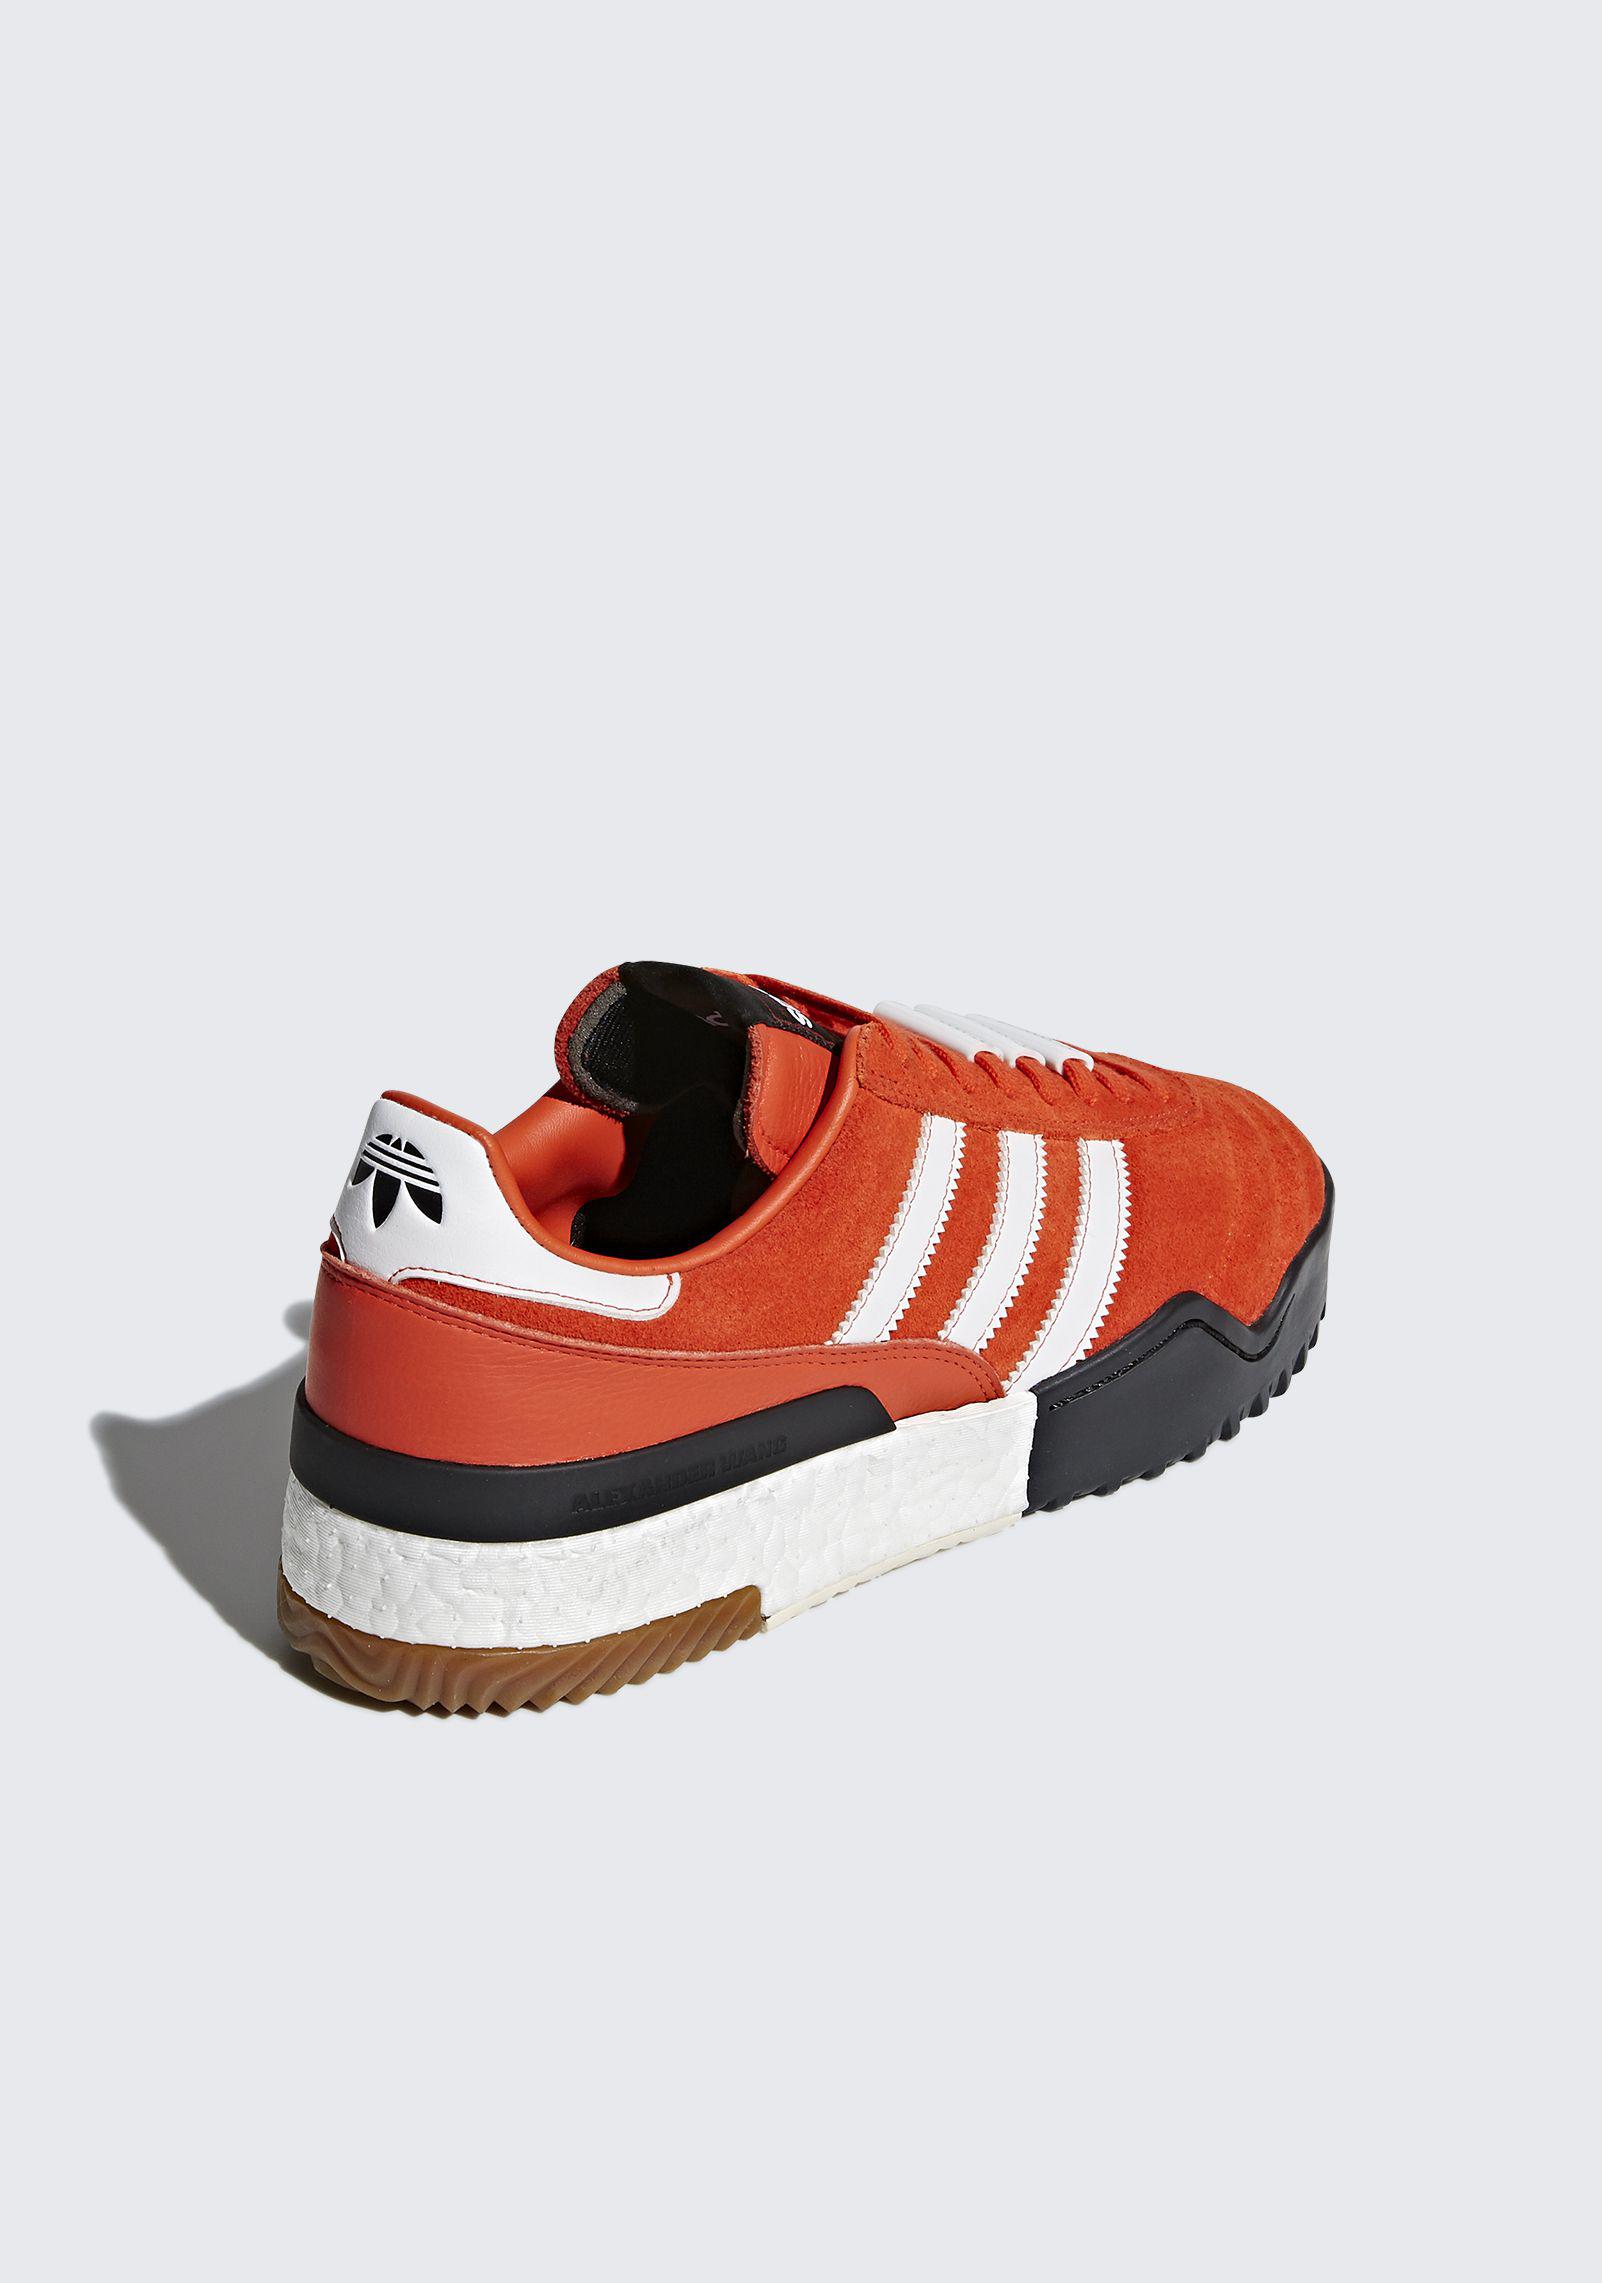 Politisk Verdensrekord Guinness Book ventilator Alexander Wang Suede Adidas Originals By Aw Bball Soccer Shoes in Red - Lyst